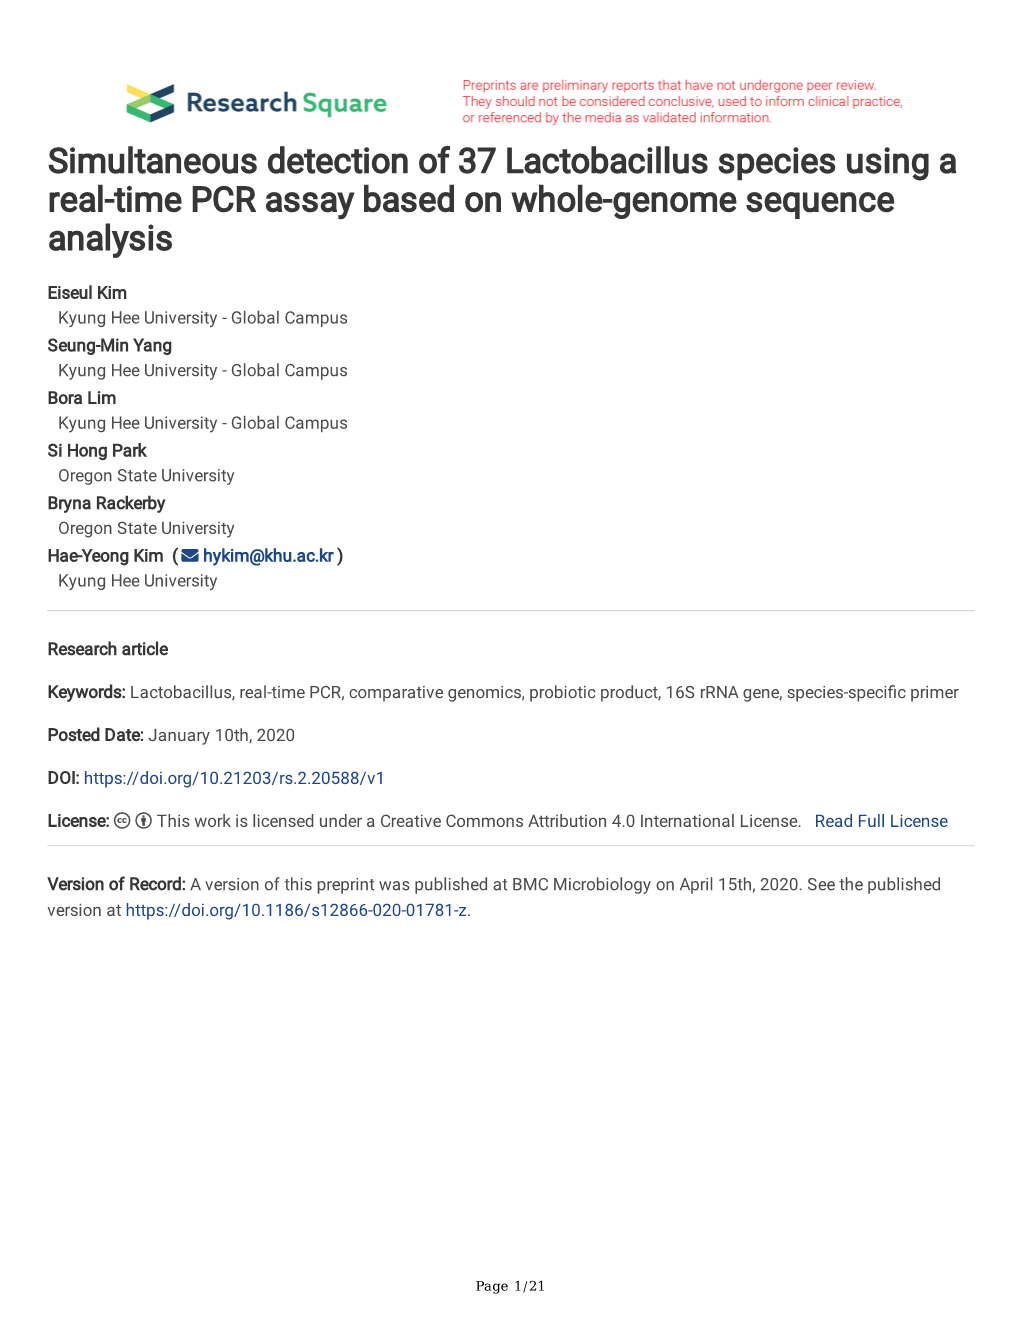 Simultaneous Detection of 37 Lactobacillus Species Using a Real-Time PCR Assay Based on Whole-Genome Sequence Analysis